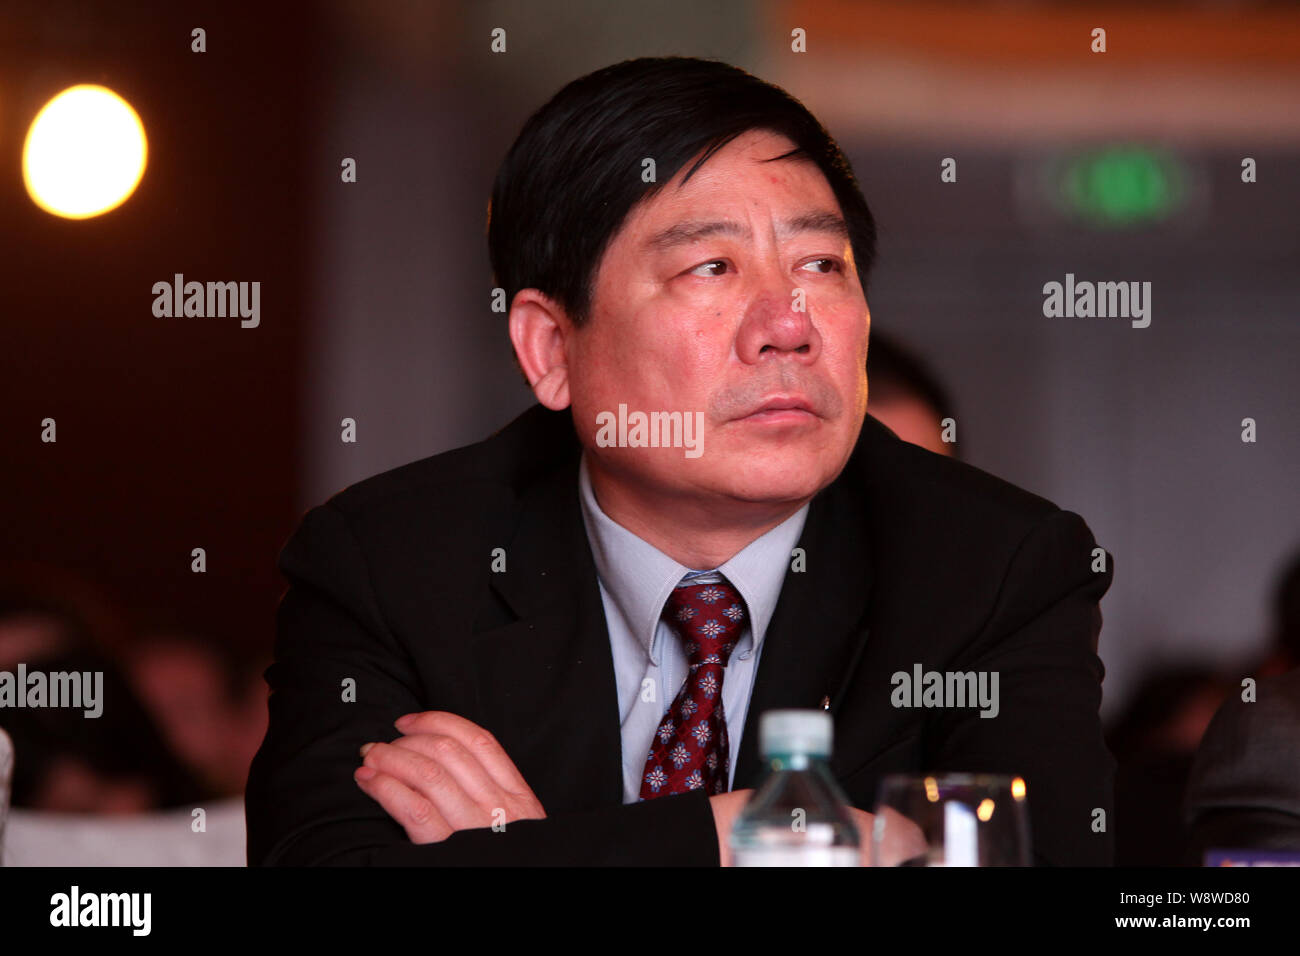 --FILE--Pang Qinghua, Chairman of the Board and General Manager of Pang Da Automobile Trade Co., is pictured at an event in Beijing, China, 2 May 2012 Stock Photo